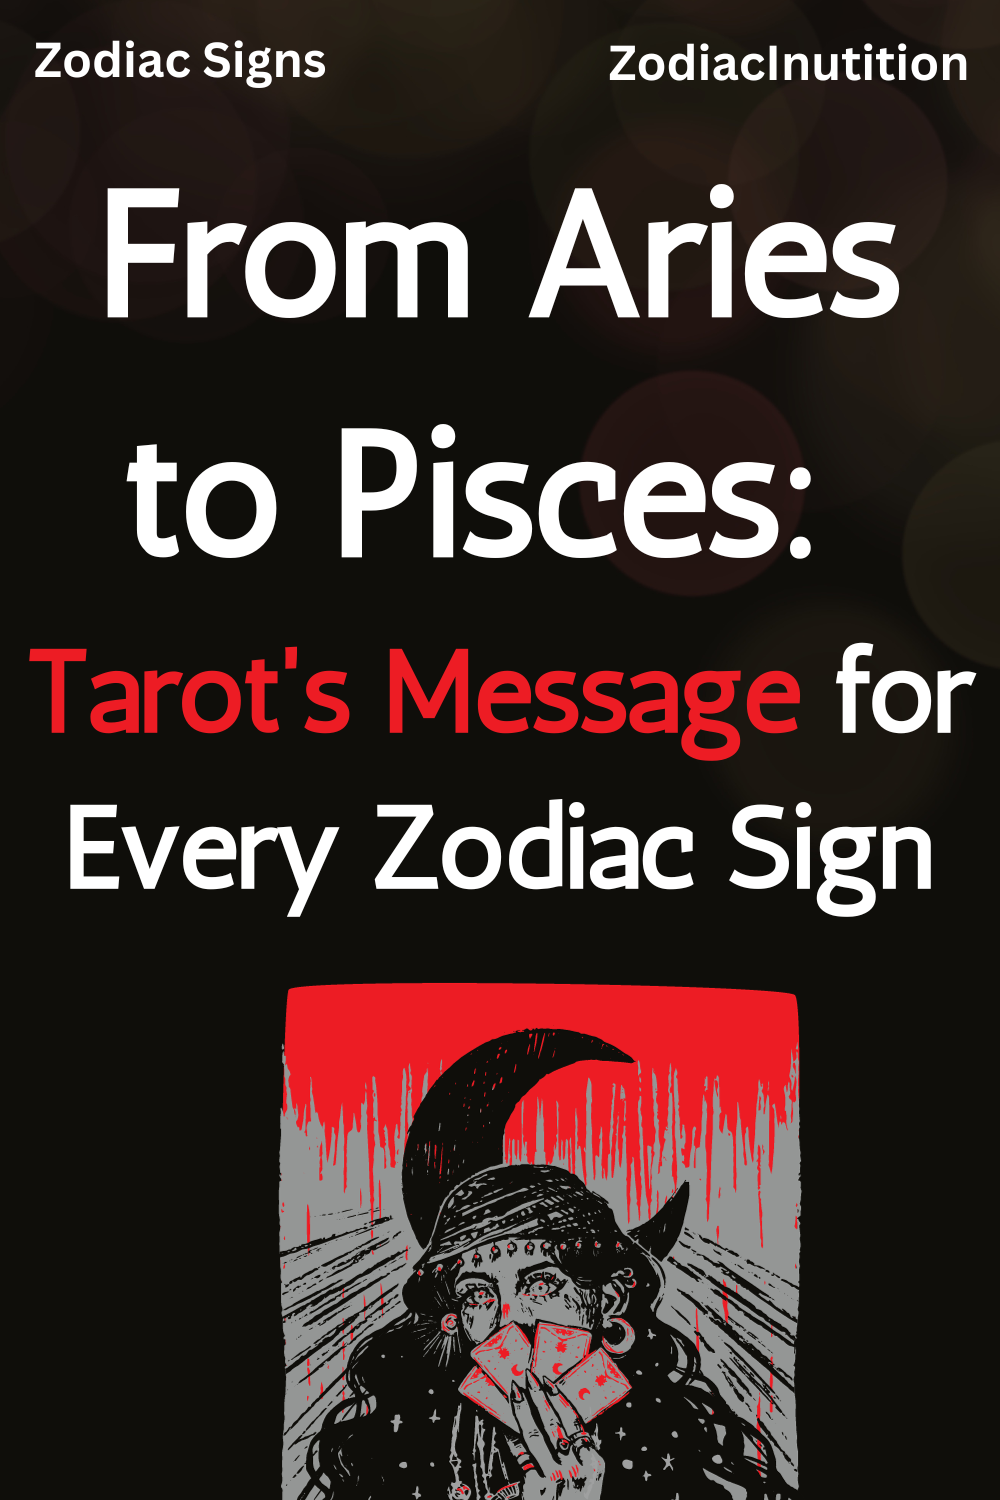 From Aries to Pisces: Tarot's Message for Every Zodiac Sign